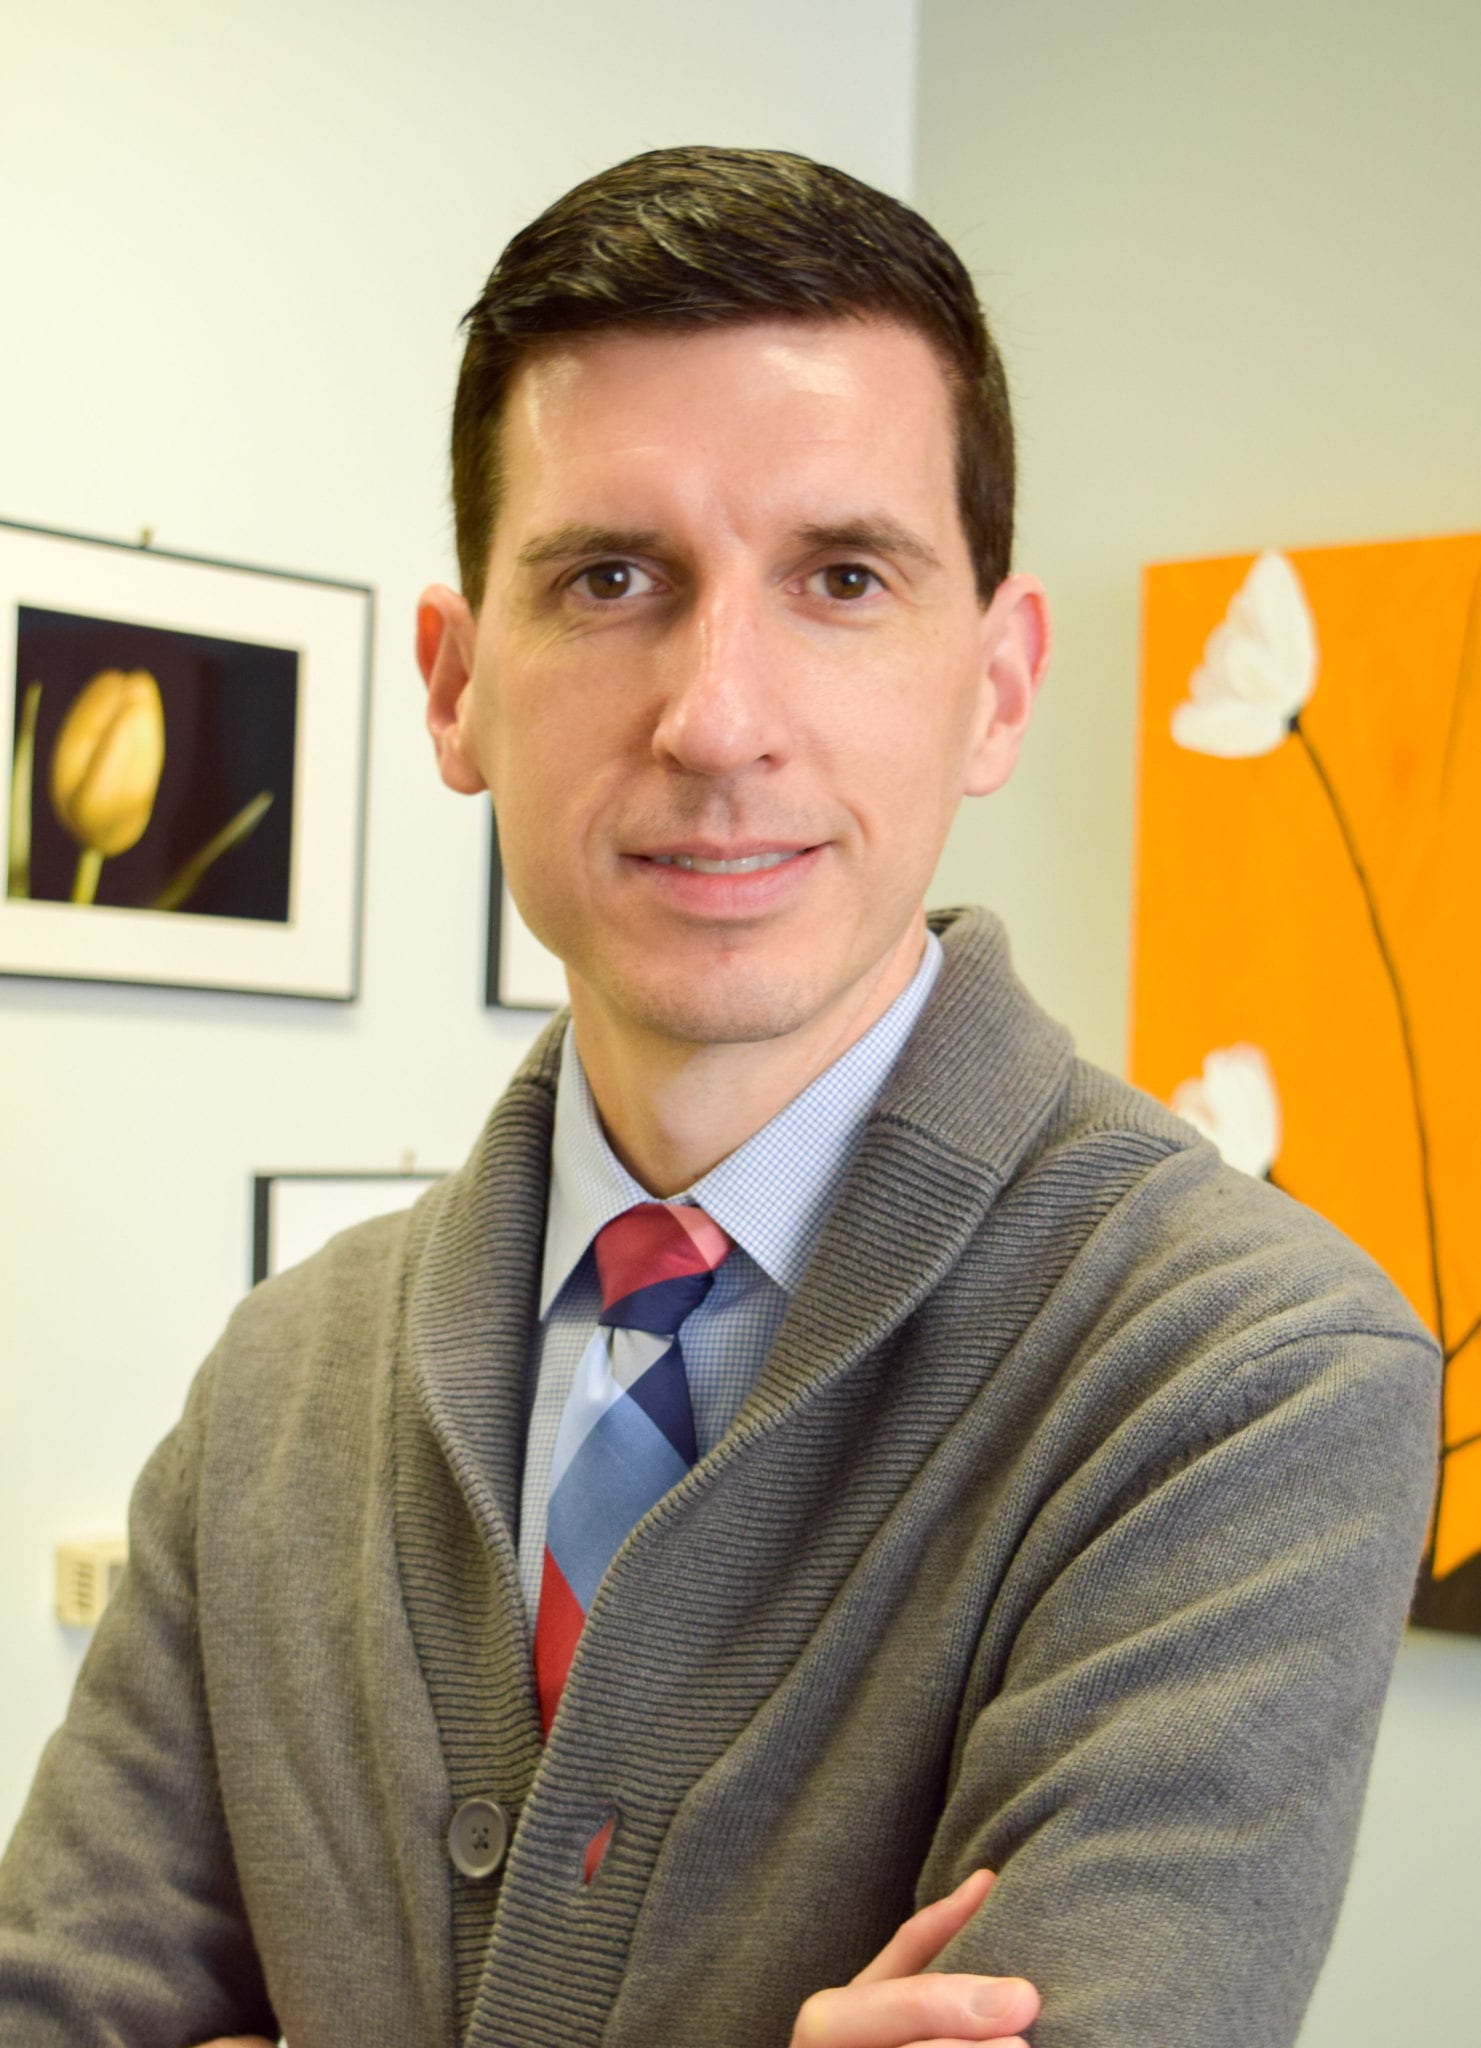 Portrait of David Card, a white man with dark hair wearing a grey sweater and colorful tie.